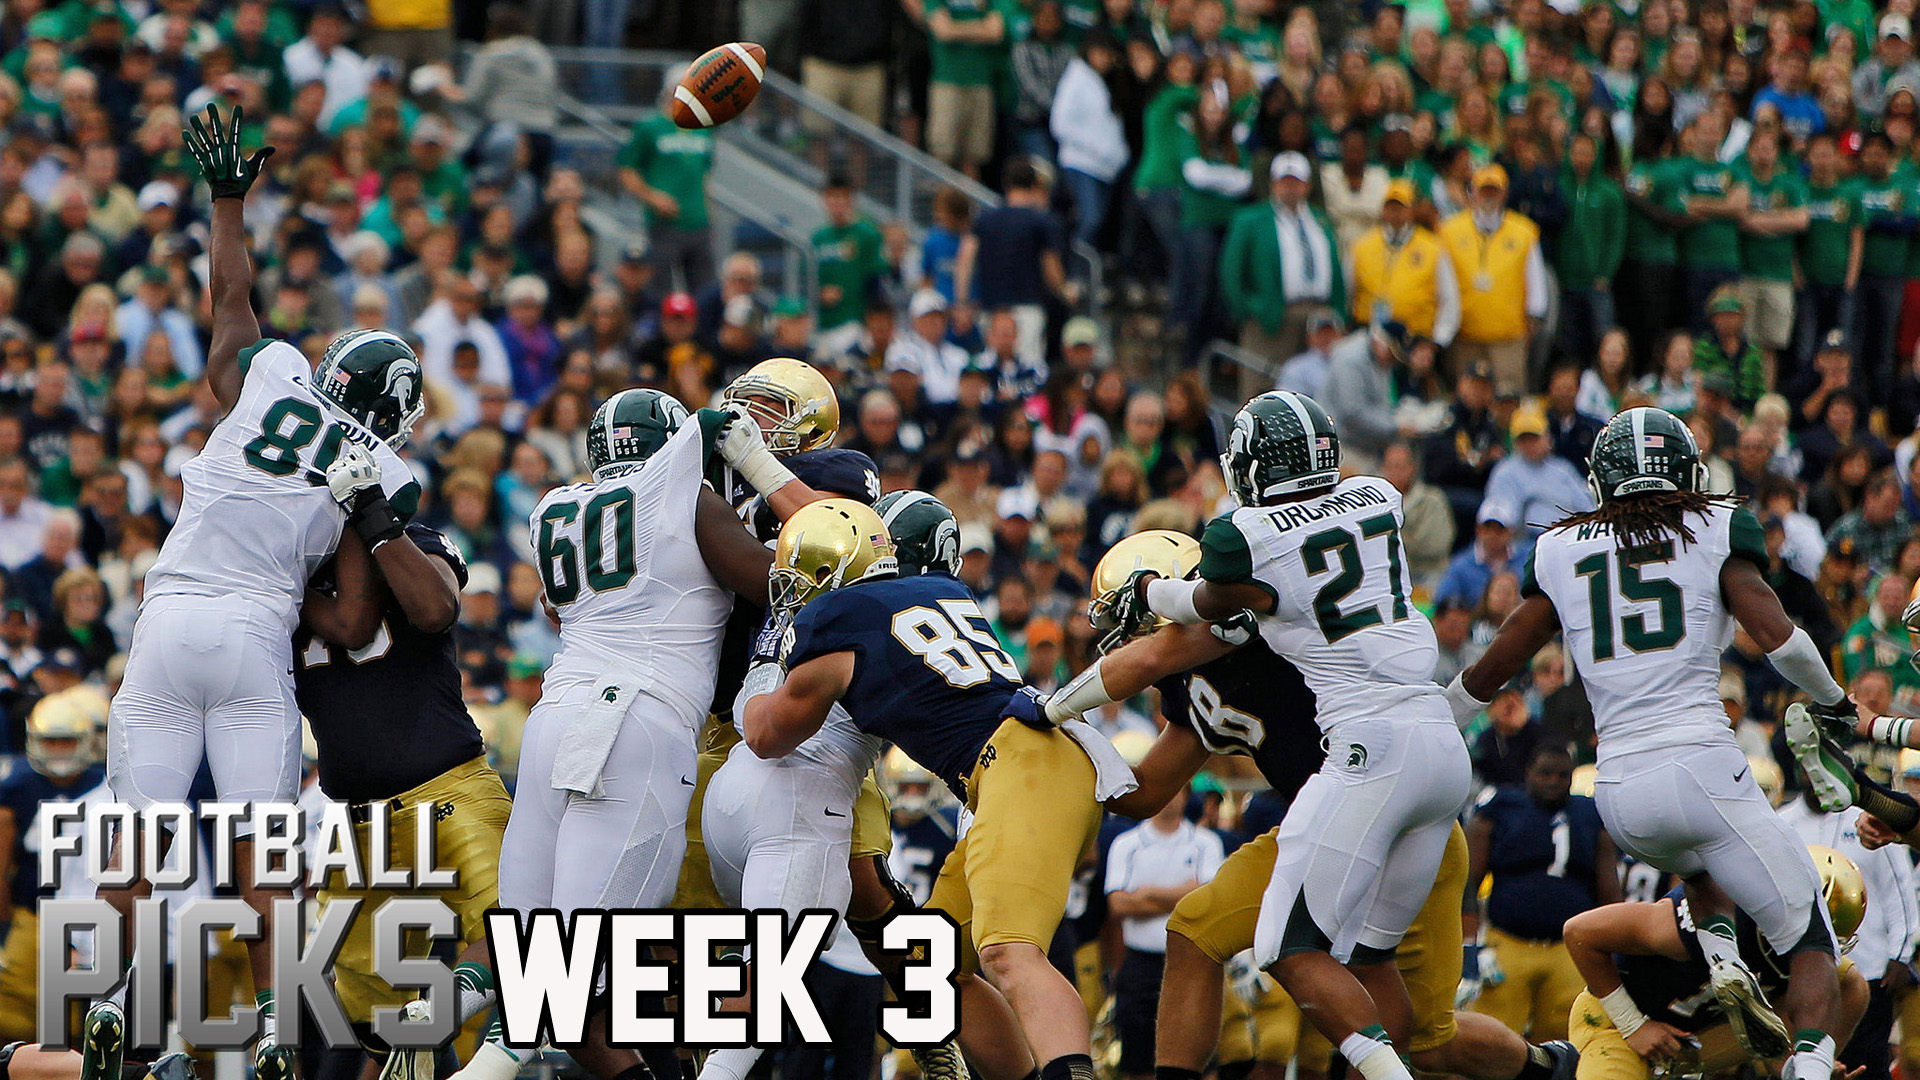 Podcast: Michigan State / Notre Dame Preview, Football Picks Wk 3 (09-14-16)